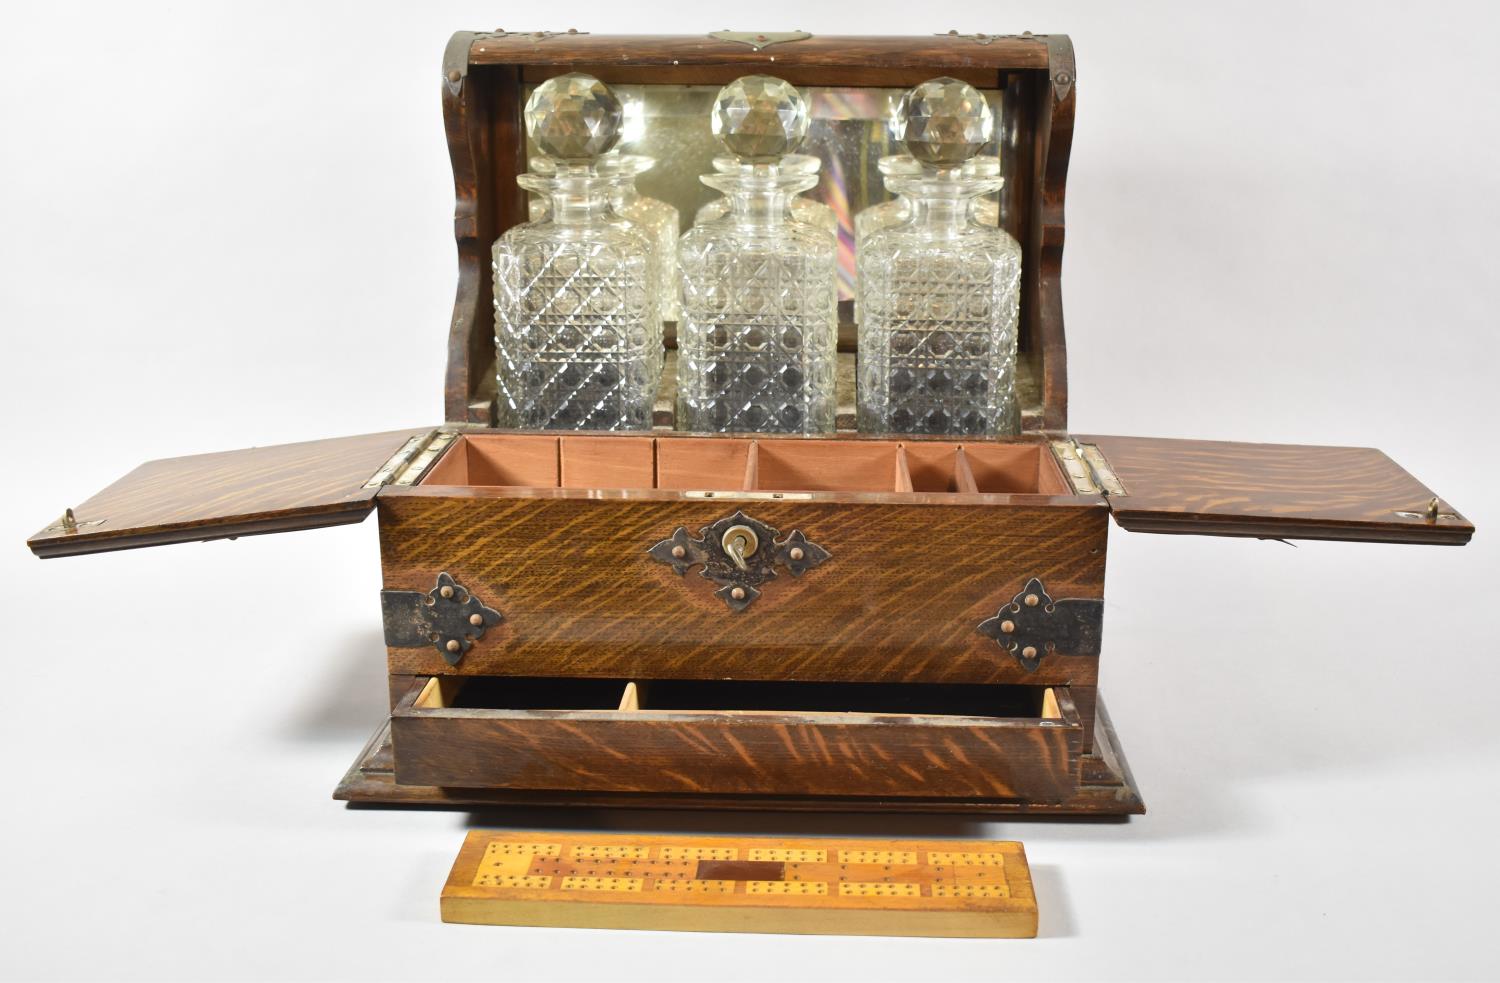 A Late 19th Century Silver Plate Mounted Three Bottle Games Tantalus with Hinged Lid to Games - Image 3 of 4